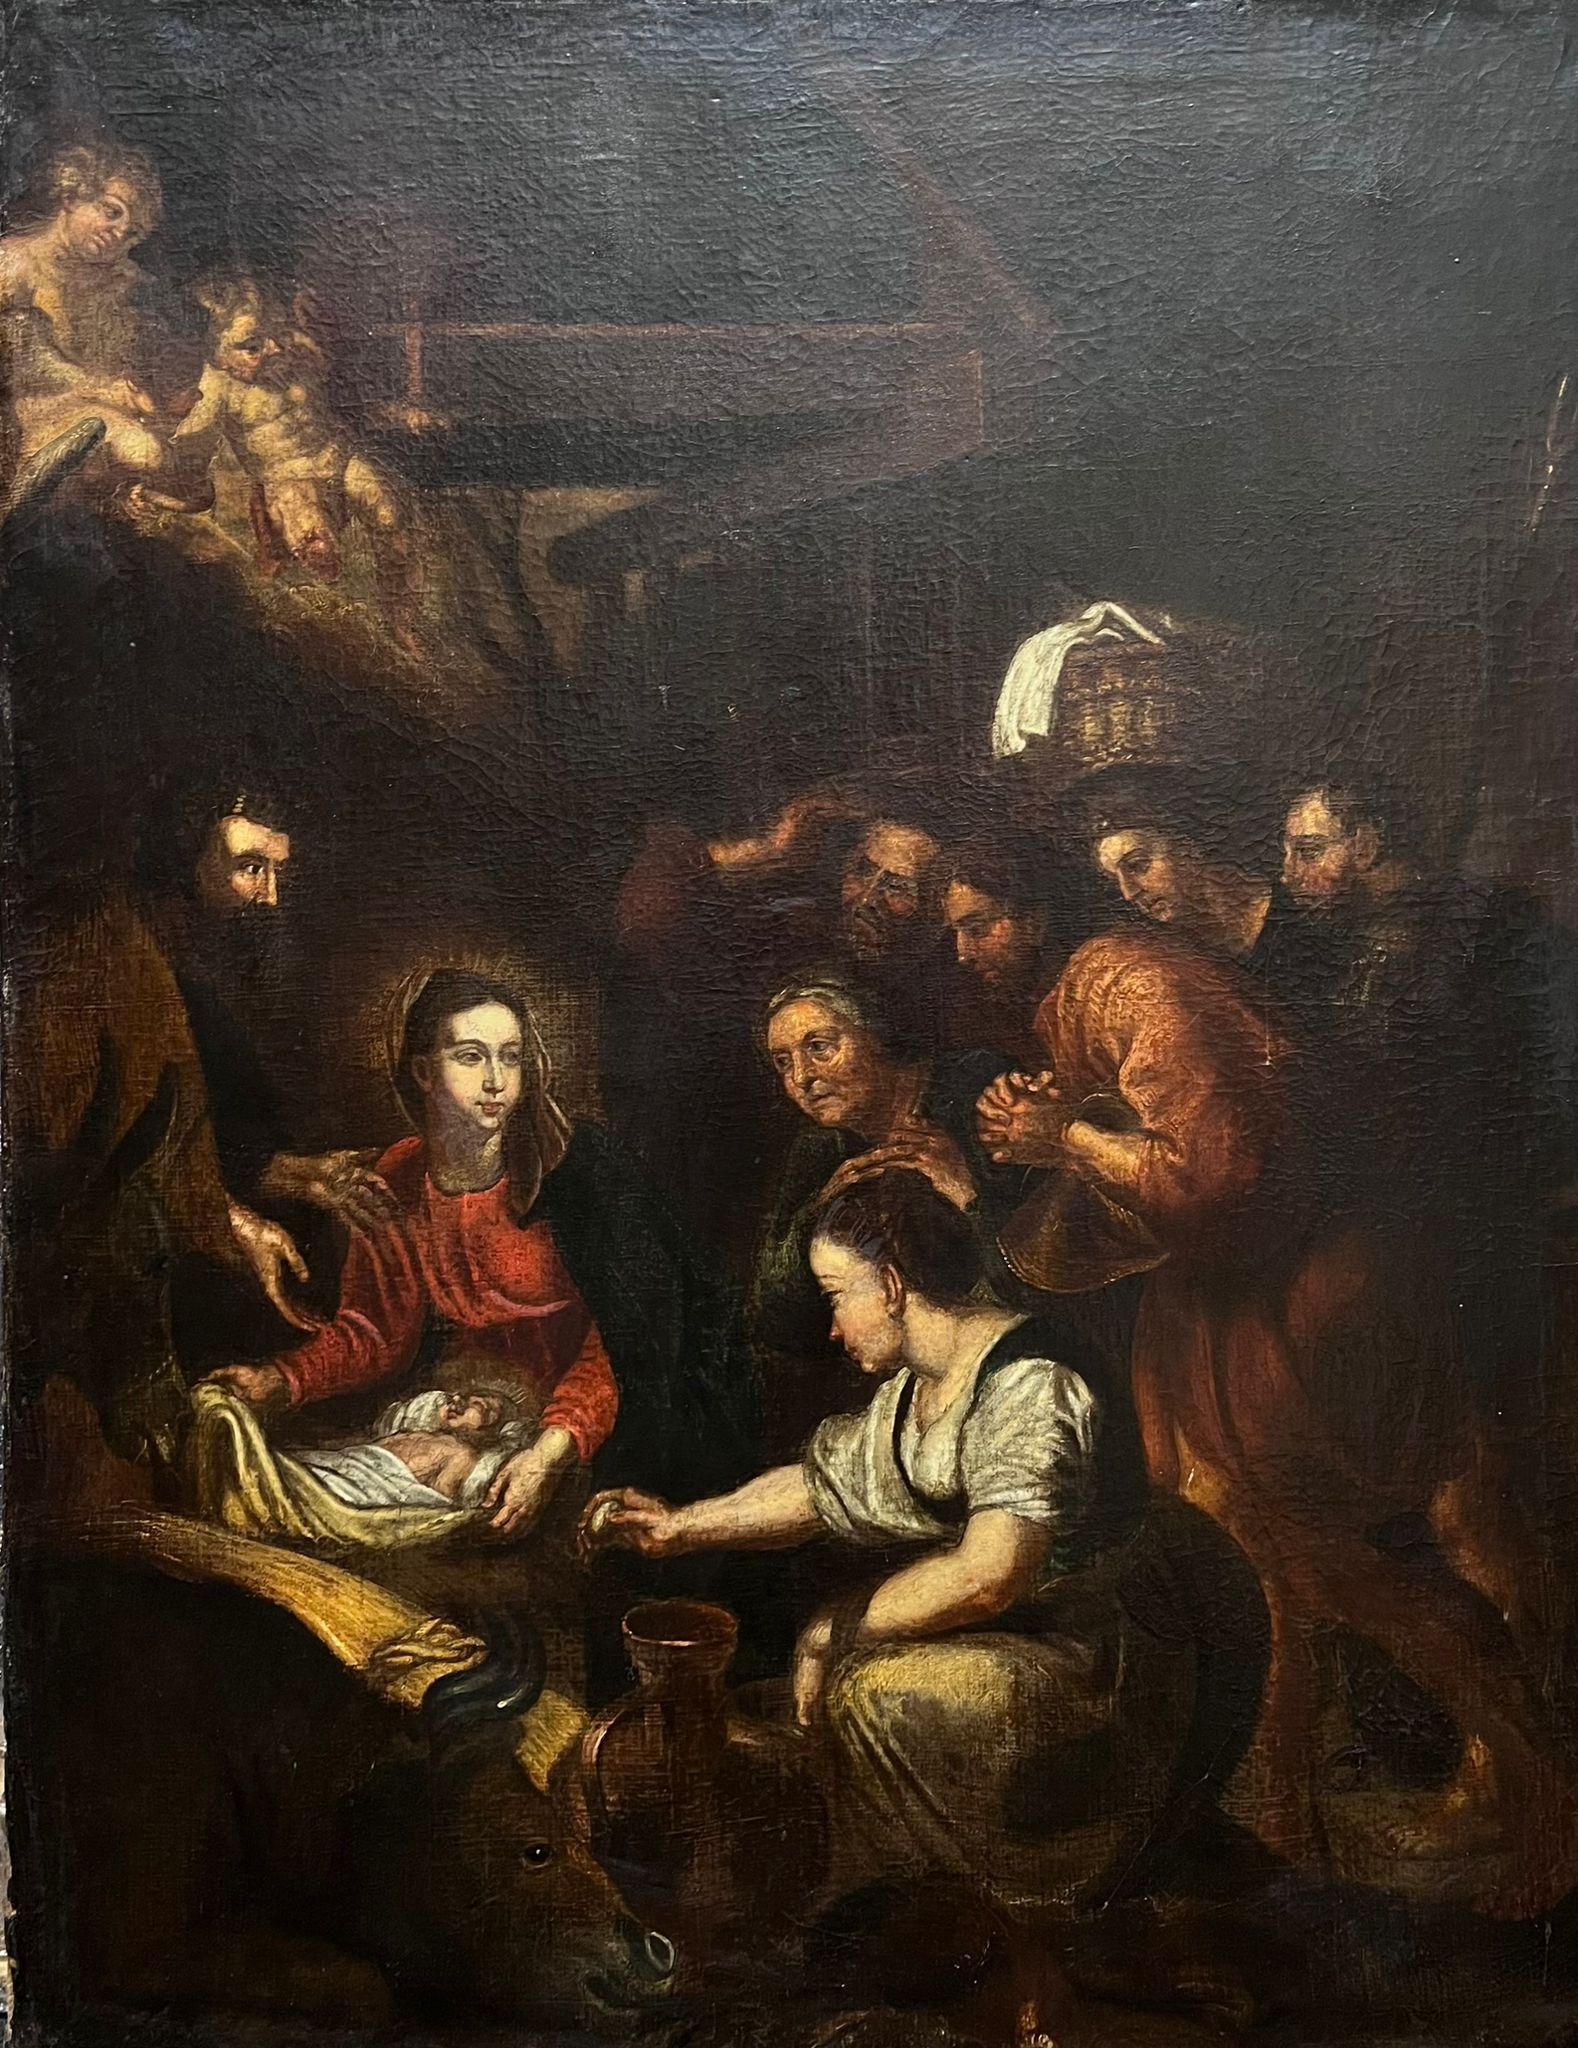 18th Dutch Old Master Figurative Painting - Very Large 1700's Dutch Old Master Oil Painting The Nativity Scene